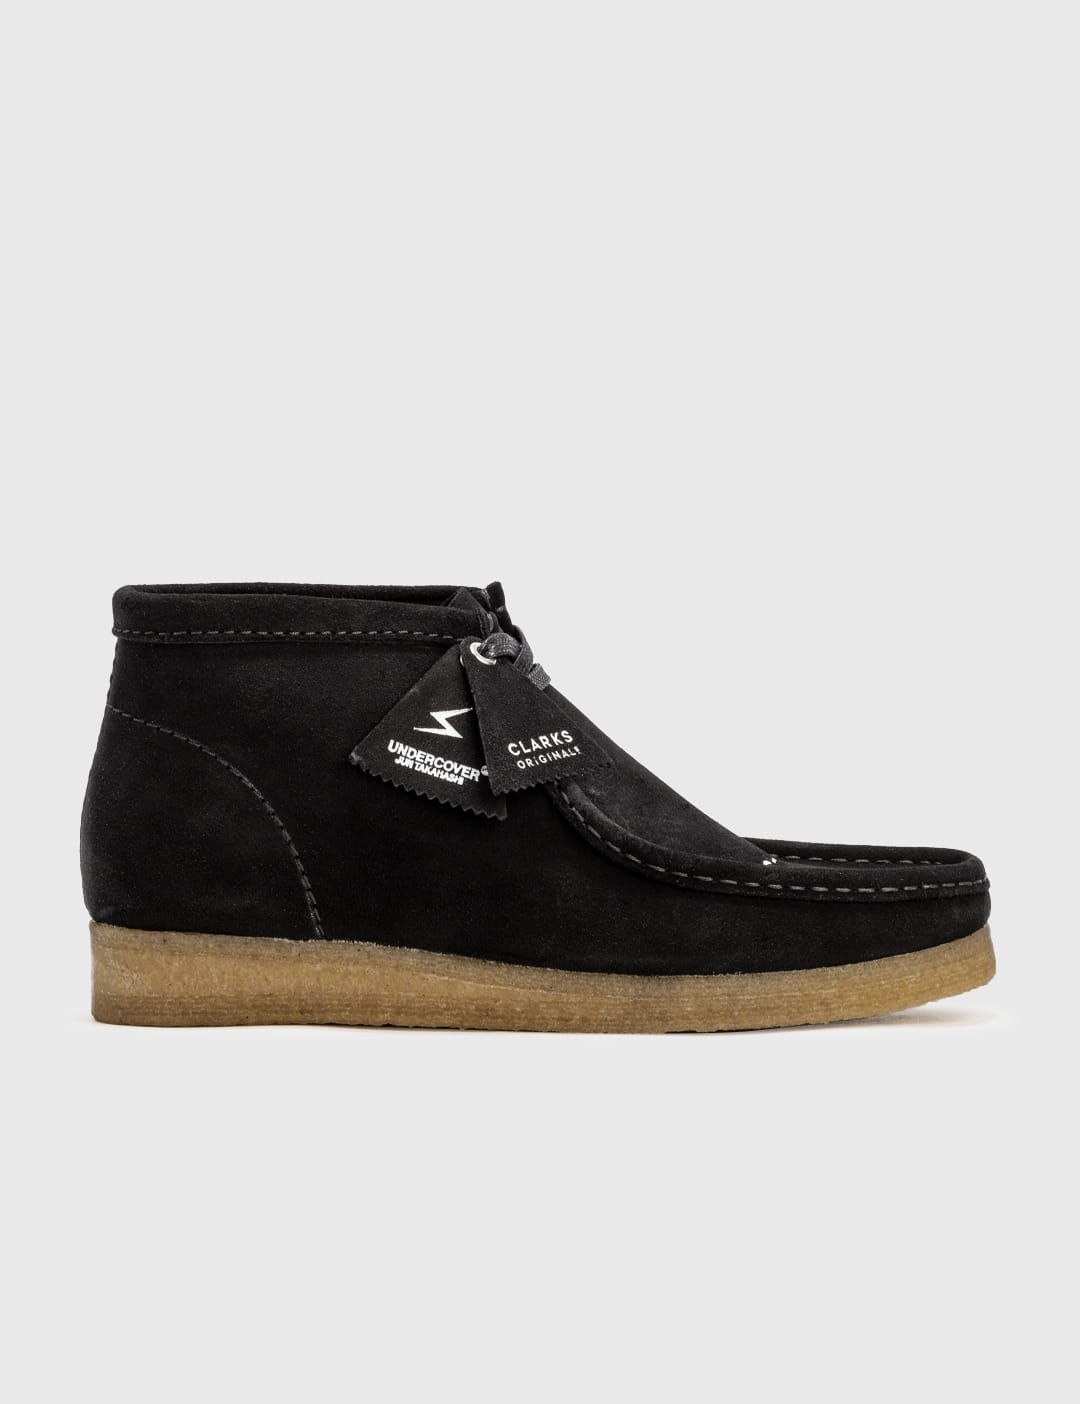 Undercover x Clarks Wallabee Boots